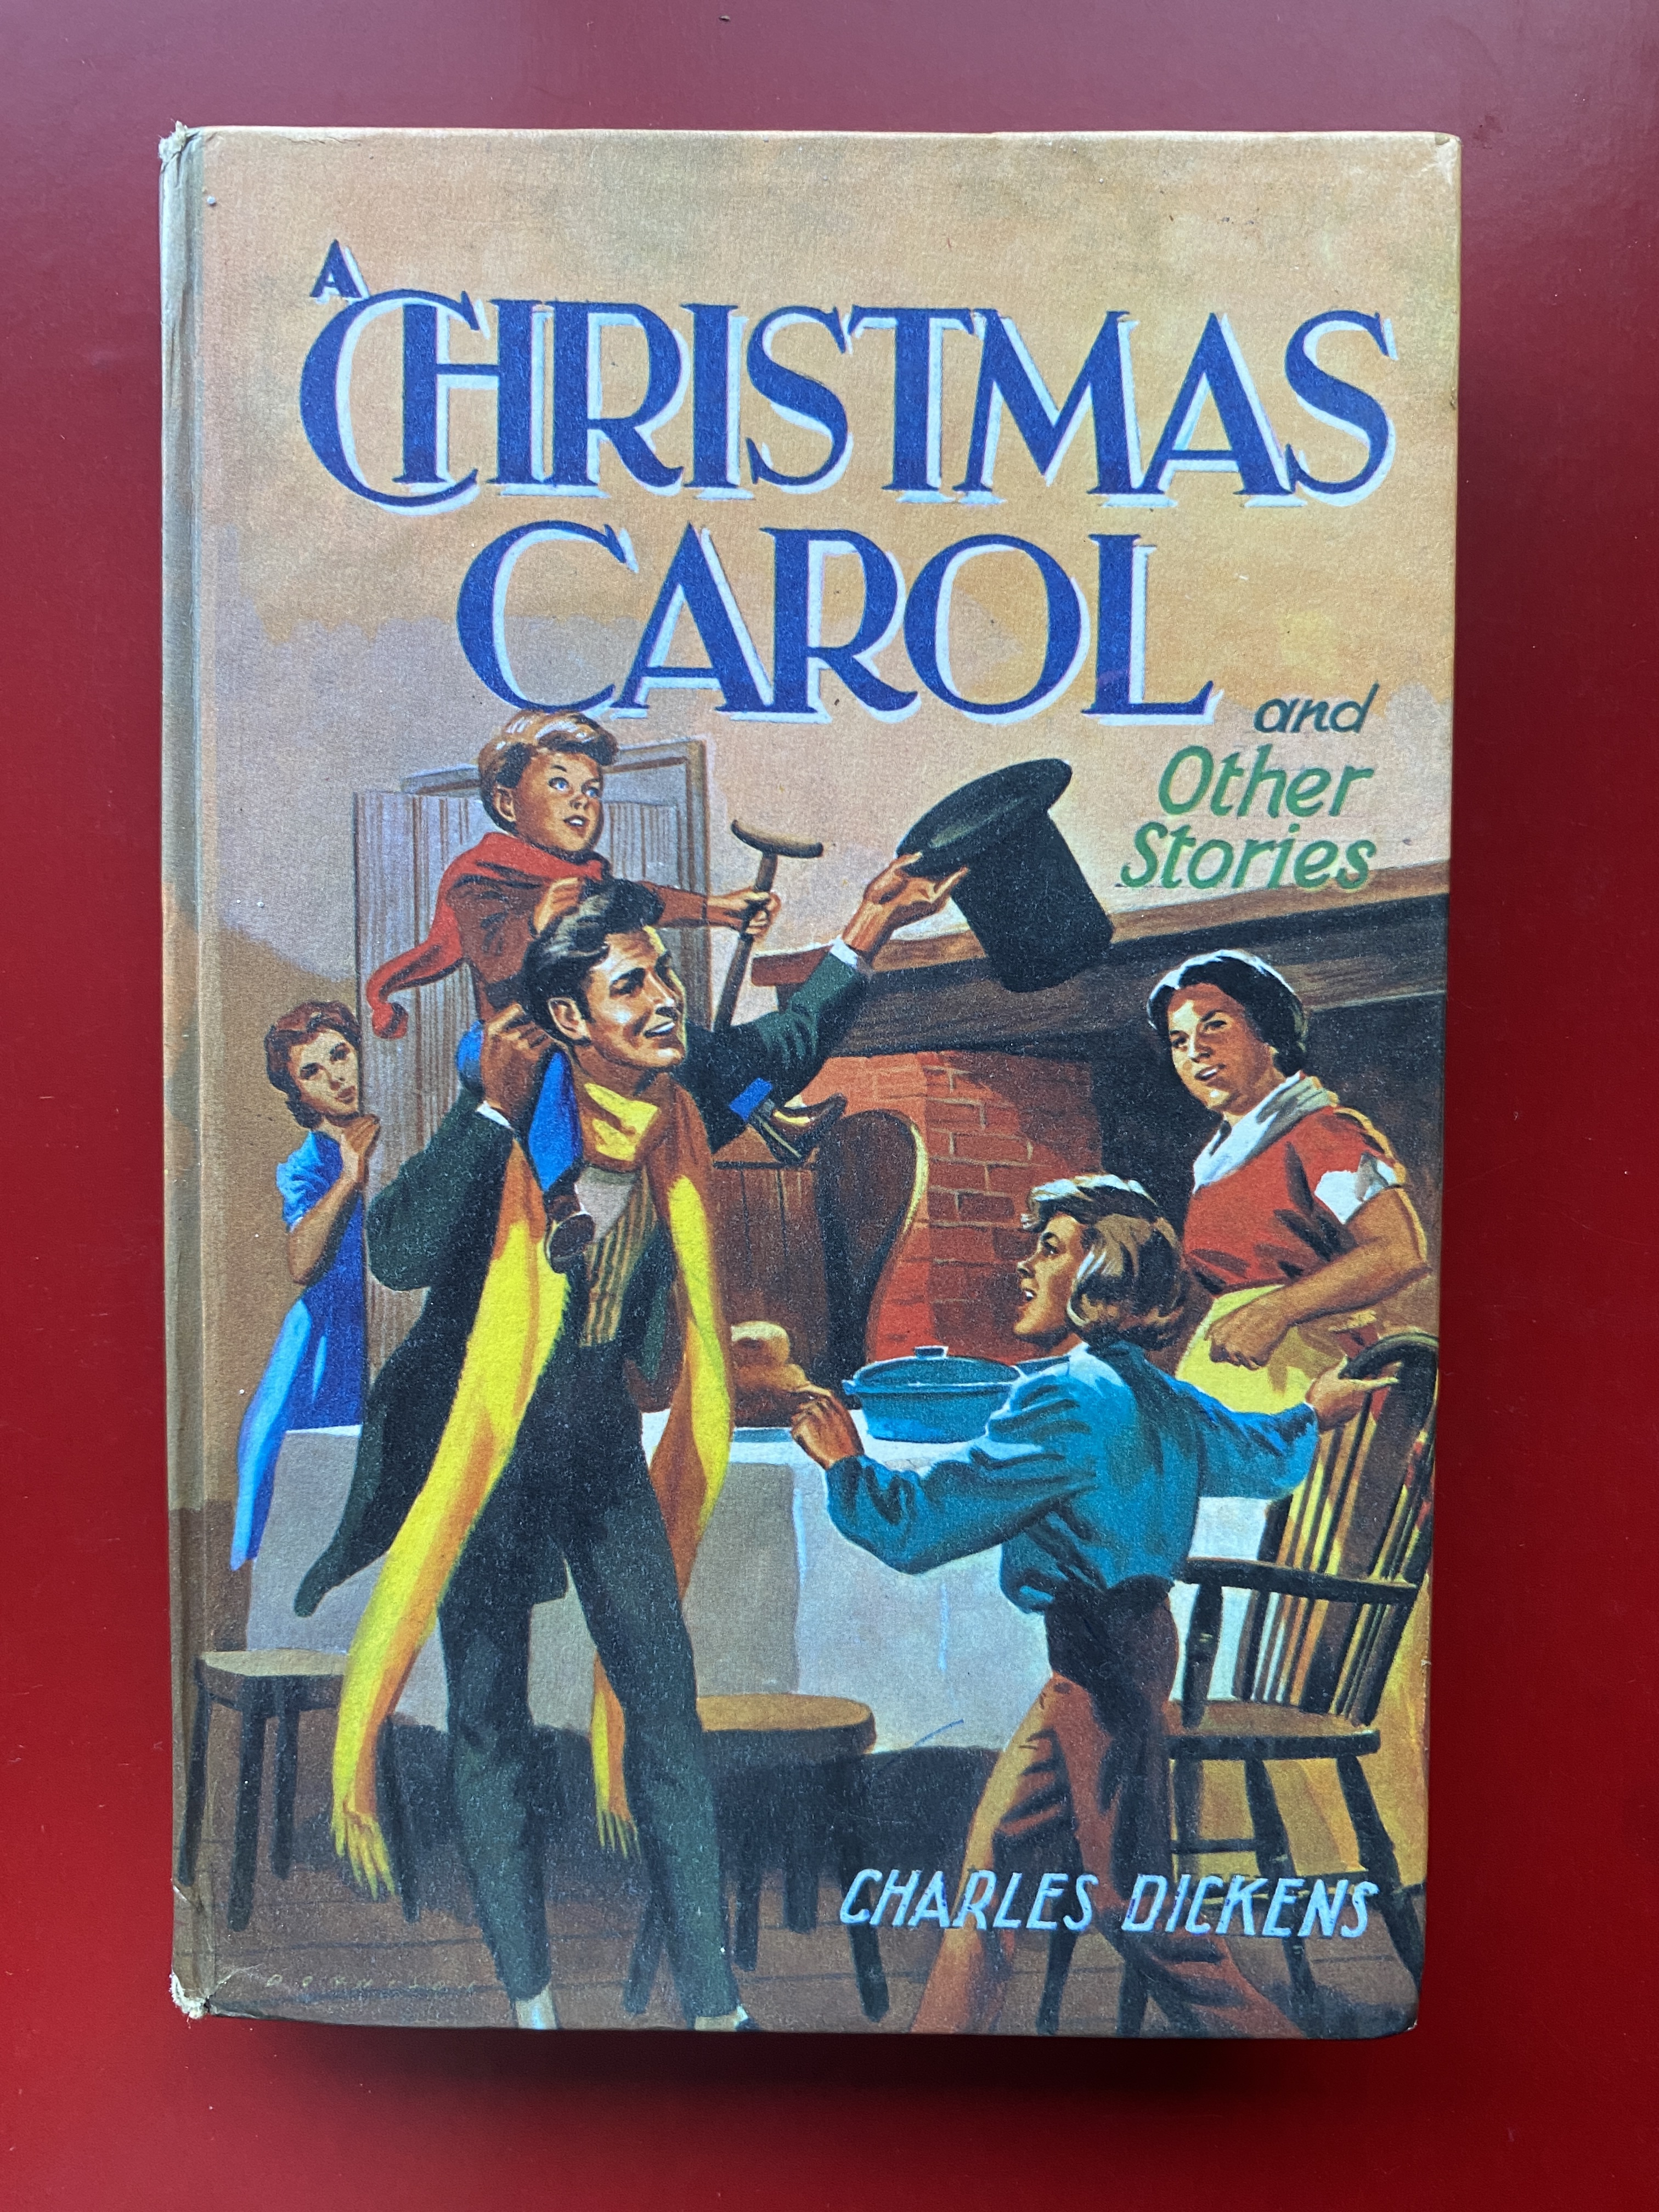 A Christmas Carol and other stories - Charles Dickens